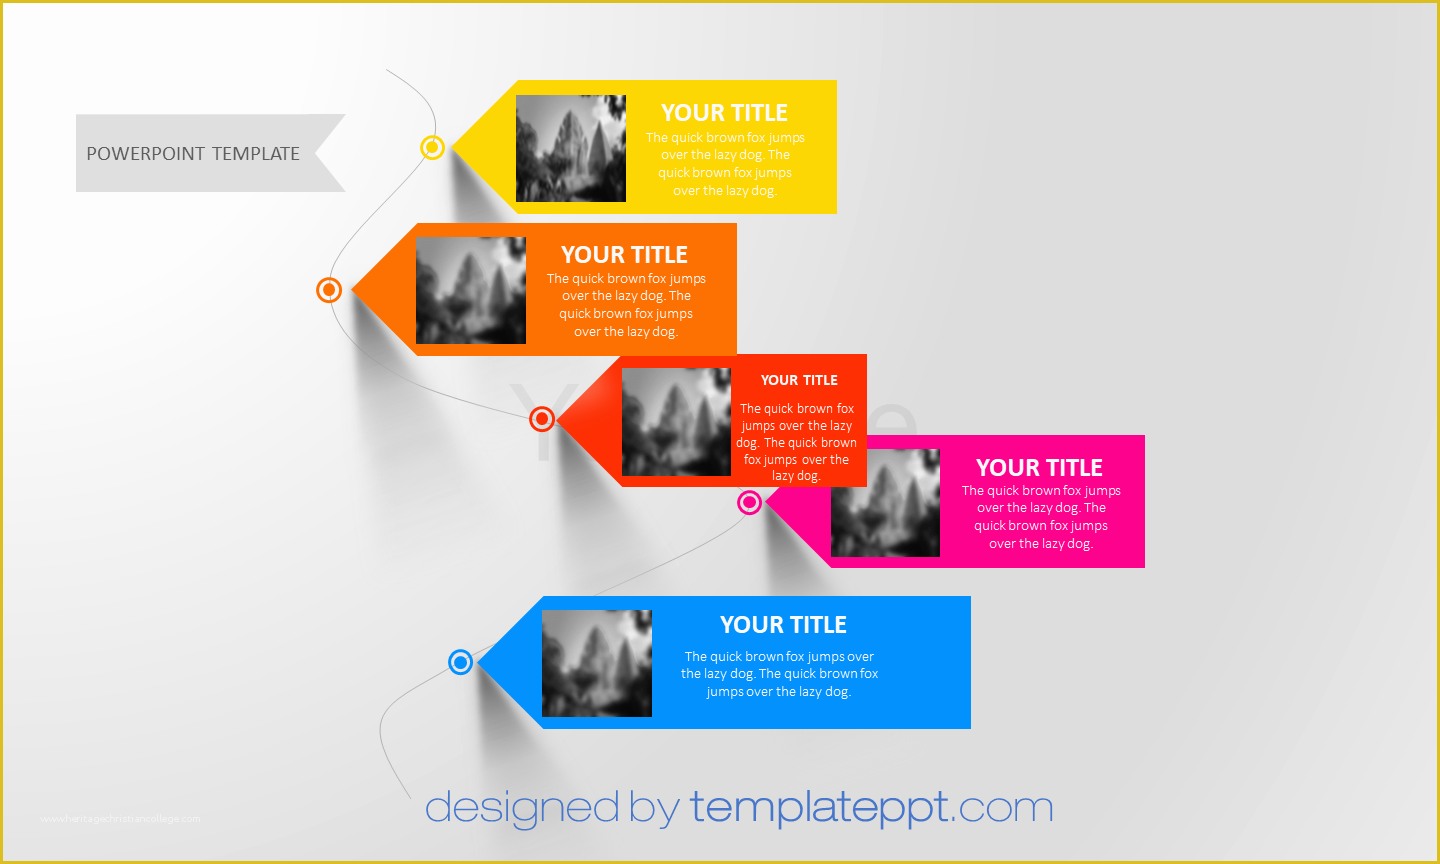 Video Animation Templates Free Download Of 008 Template Ideas Free Animated Powerpoint Ulyssesroom